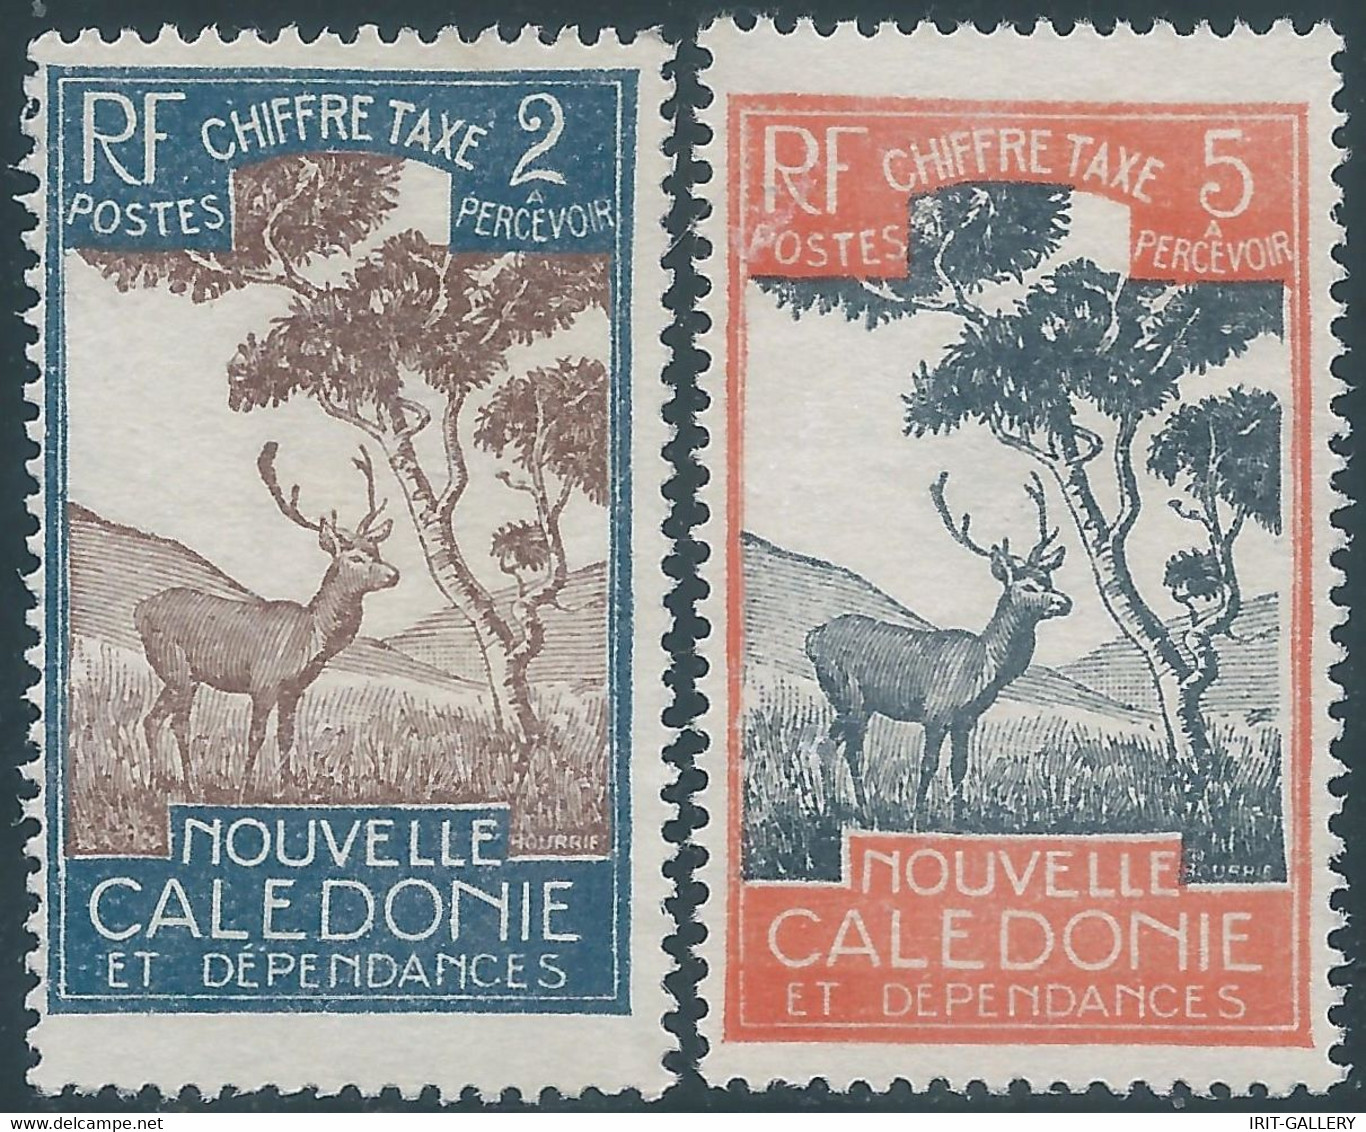 FRANCE,Calédonie - New Caledonia,1920 CHIFFER TAXE,Revenue Stamps Fiscal Tax,2 & 5F,Mint - Strafport